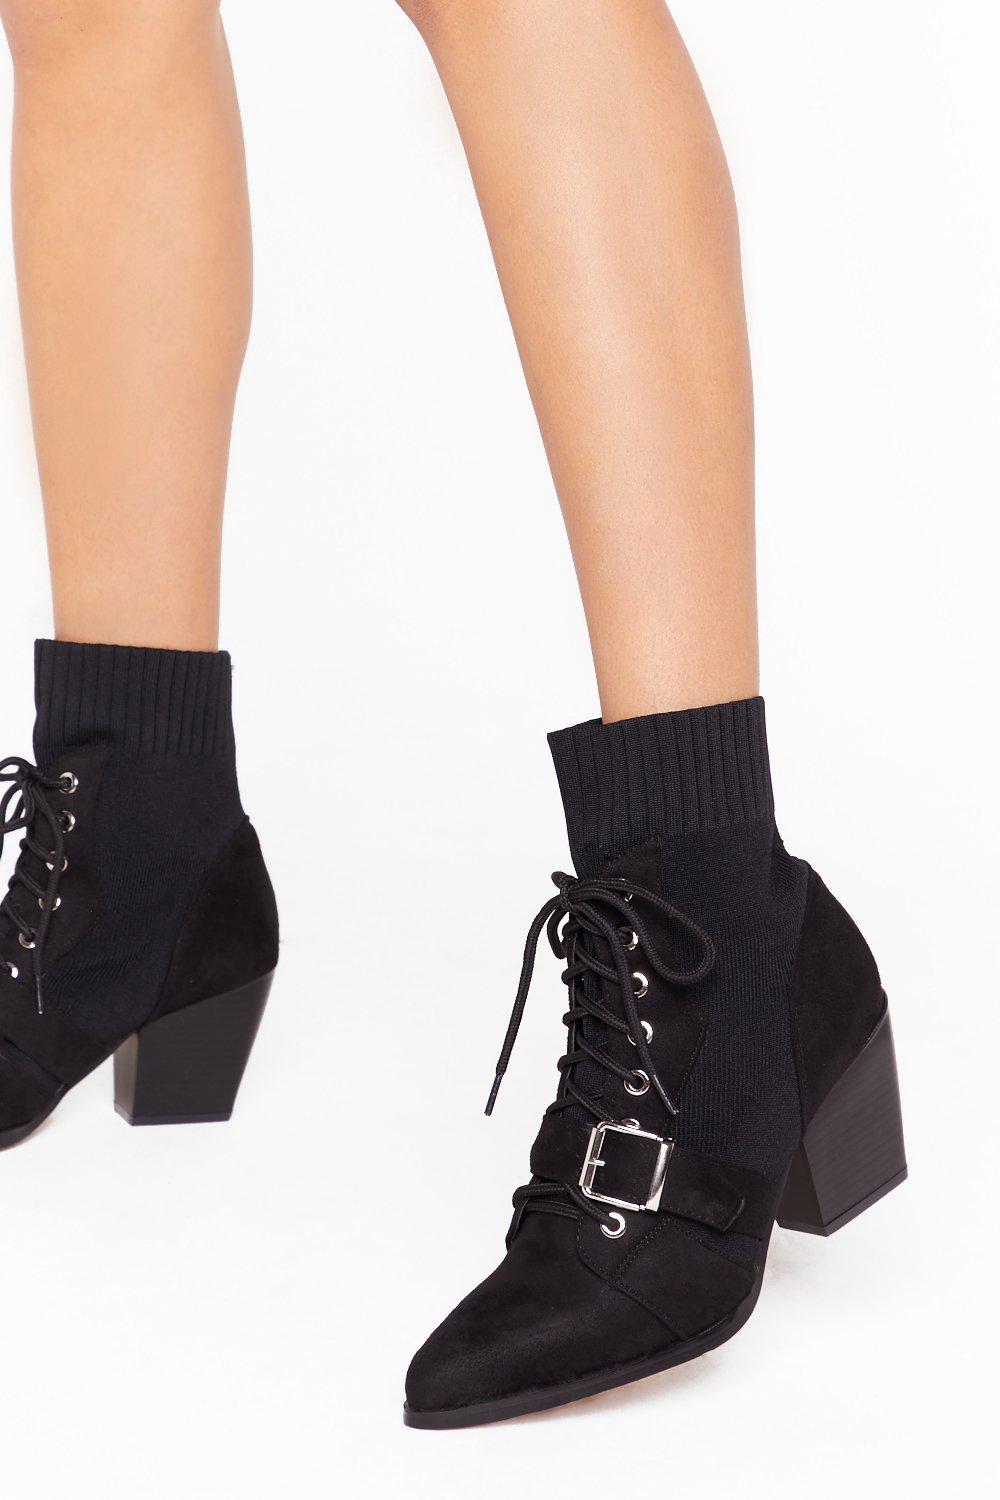 black lace up sock boots